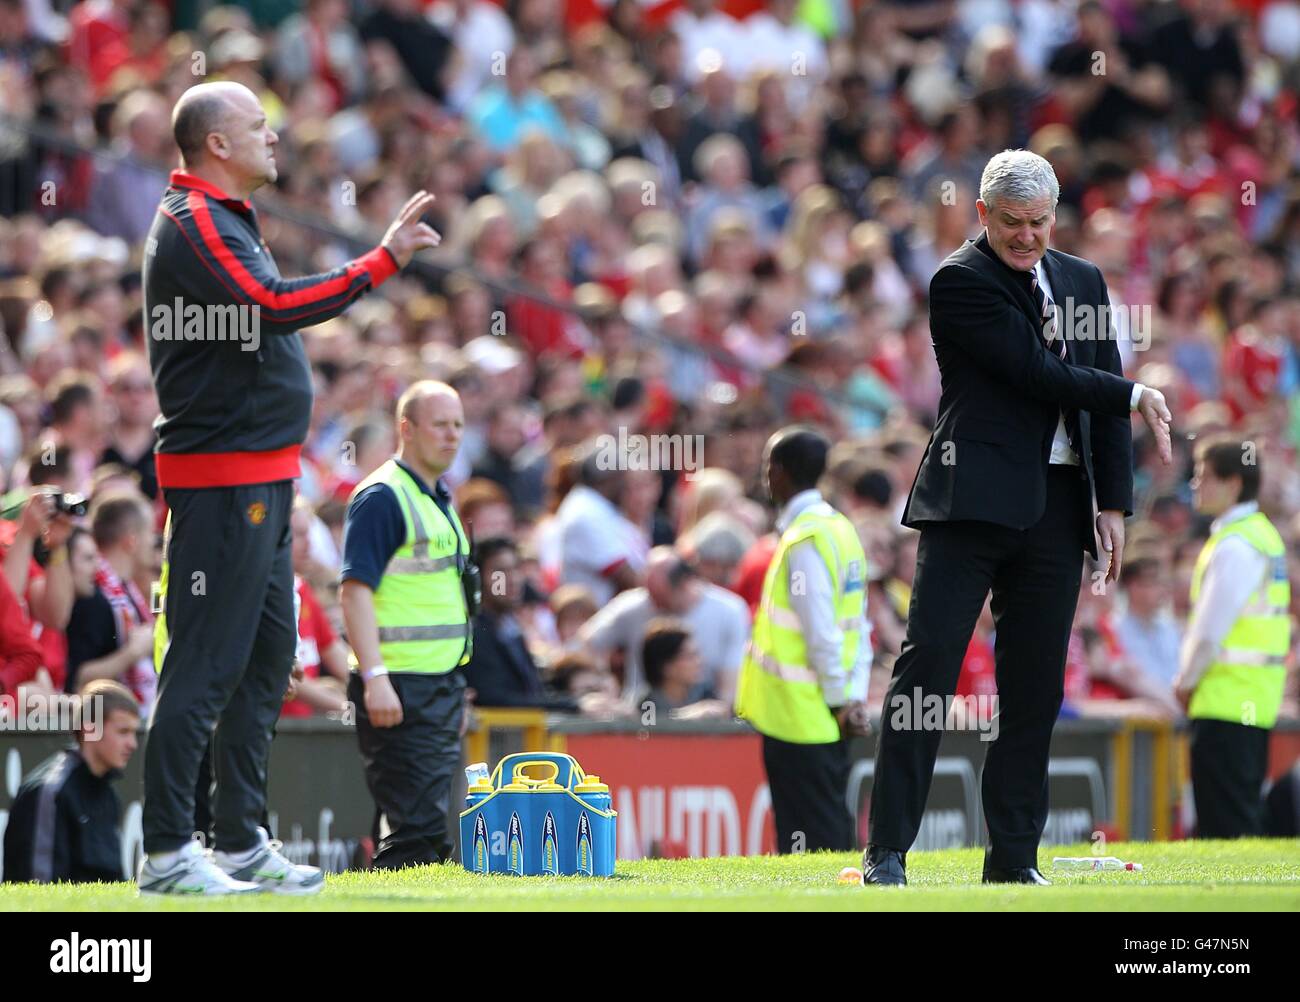 Soccer - Barclays Premier League - Manchester United v Fulham - Old Trafford. Fulham manager Mark Hughes (right) and Manchester United assistant manager Mike Phelan (left) on the touchline Stock Photo